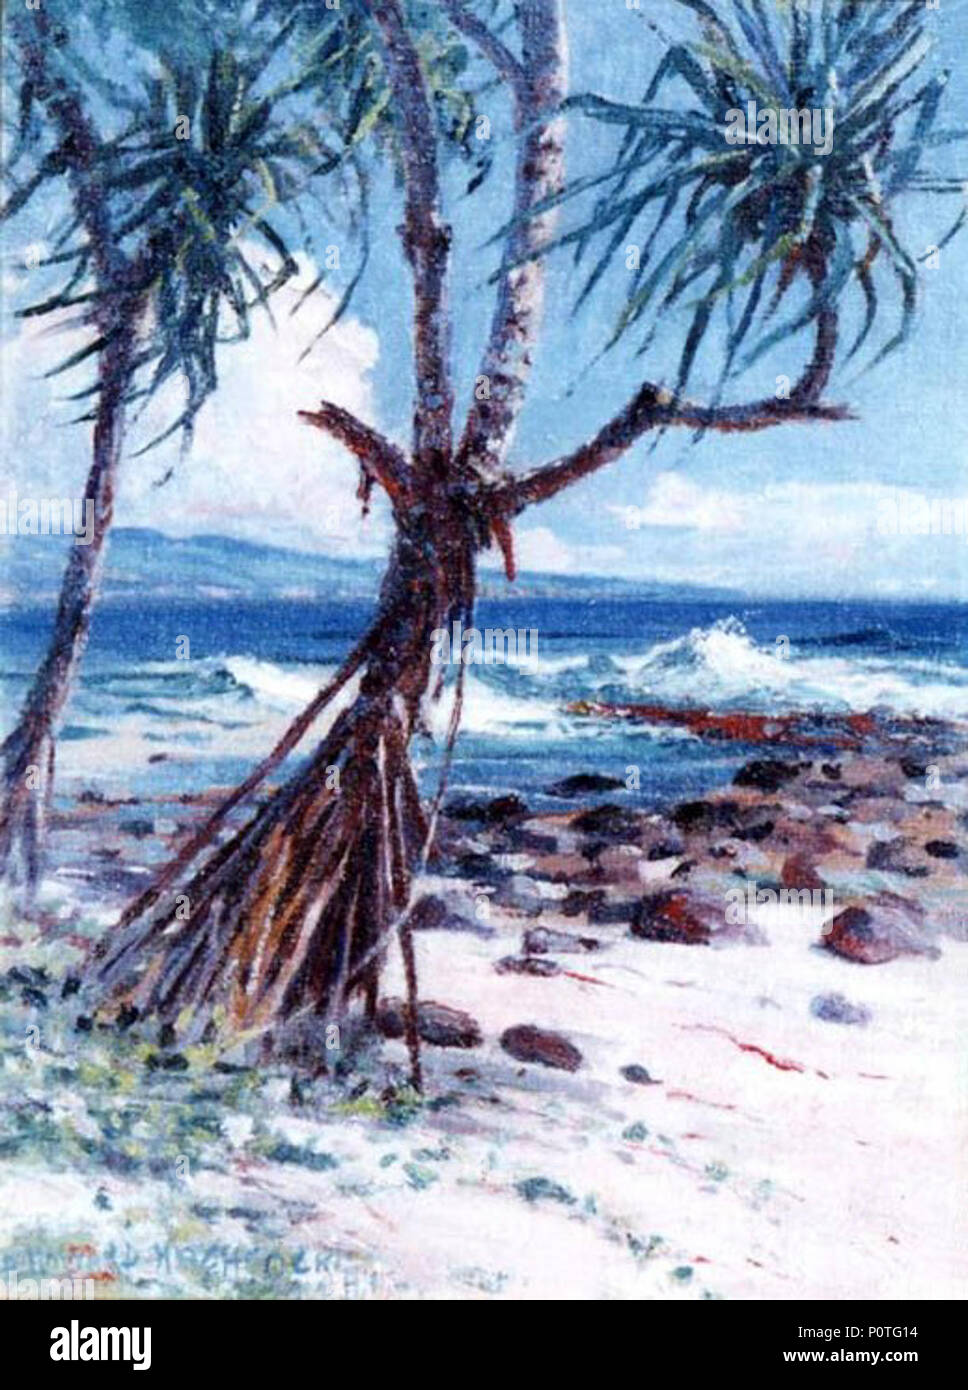 'Lauhala' by D. Howard Hitchcock, oil on board, 16 x 12 inches. Stock Photo